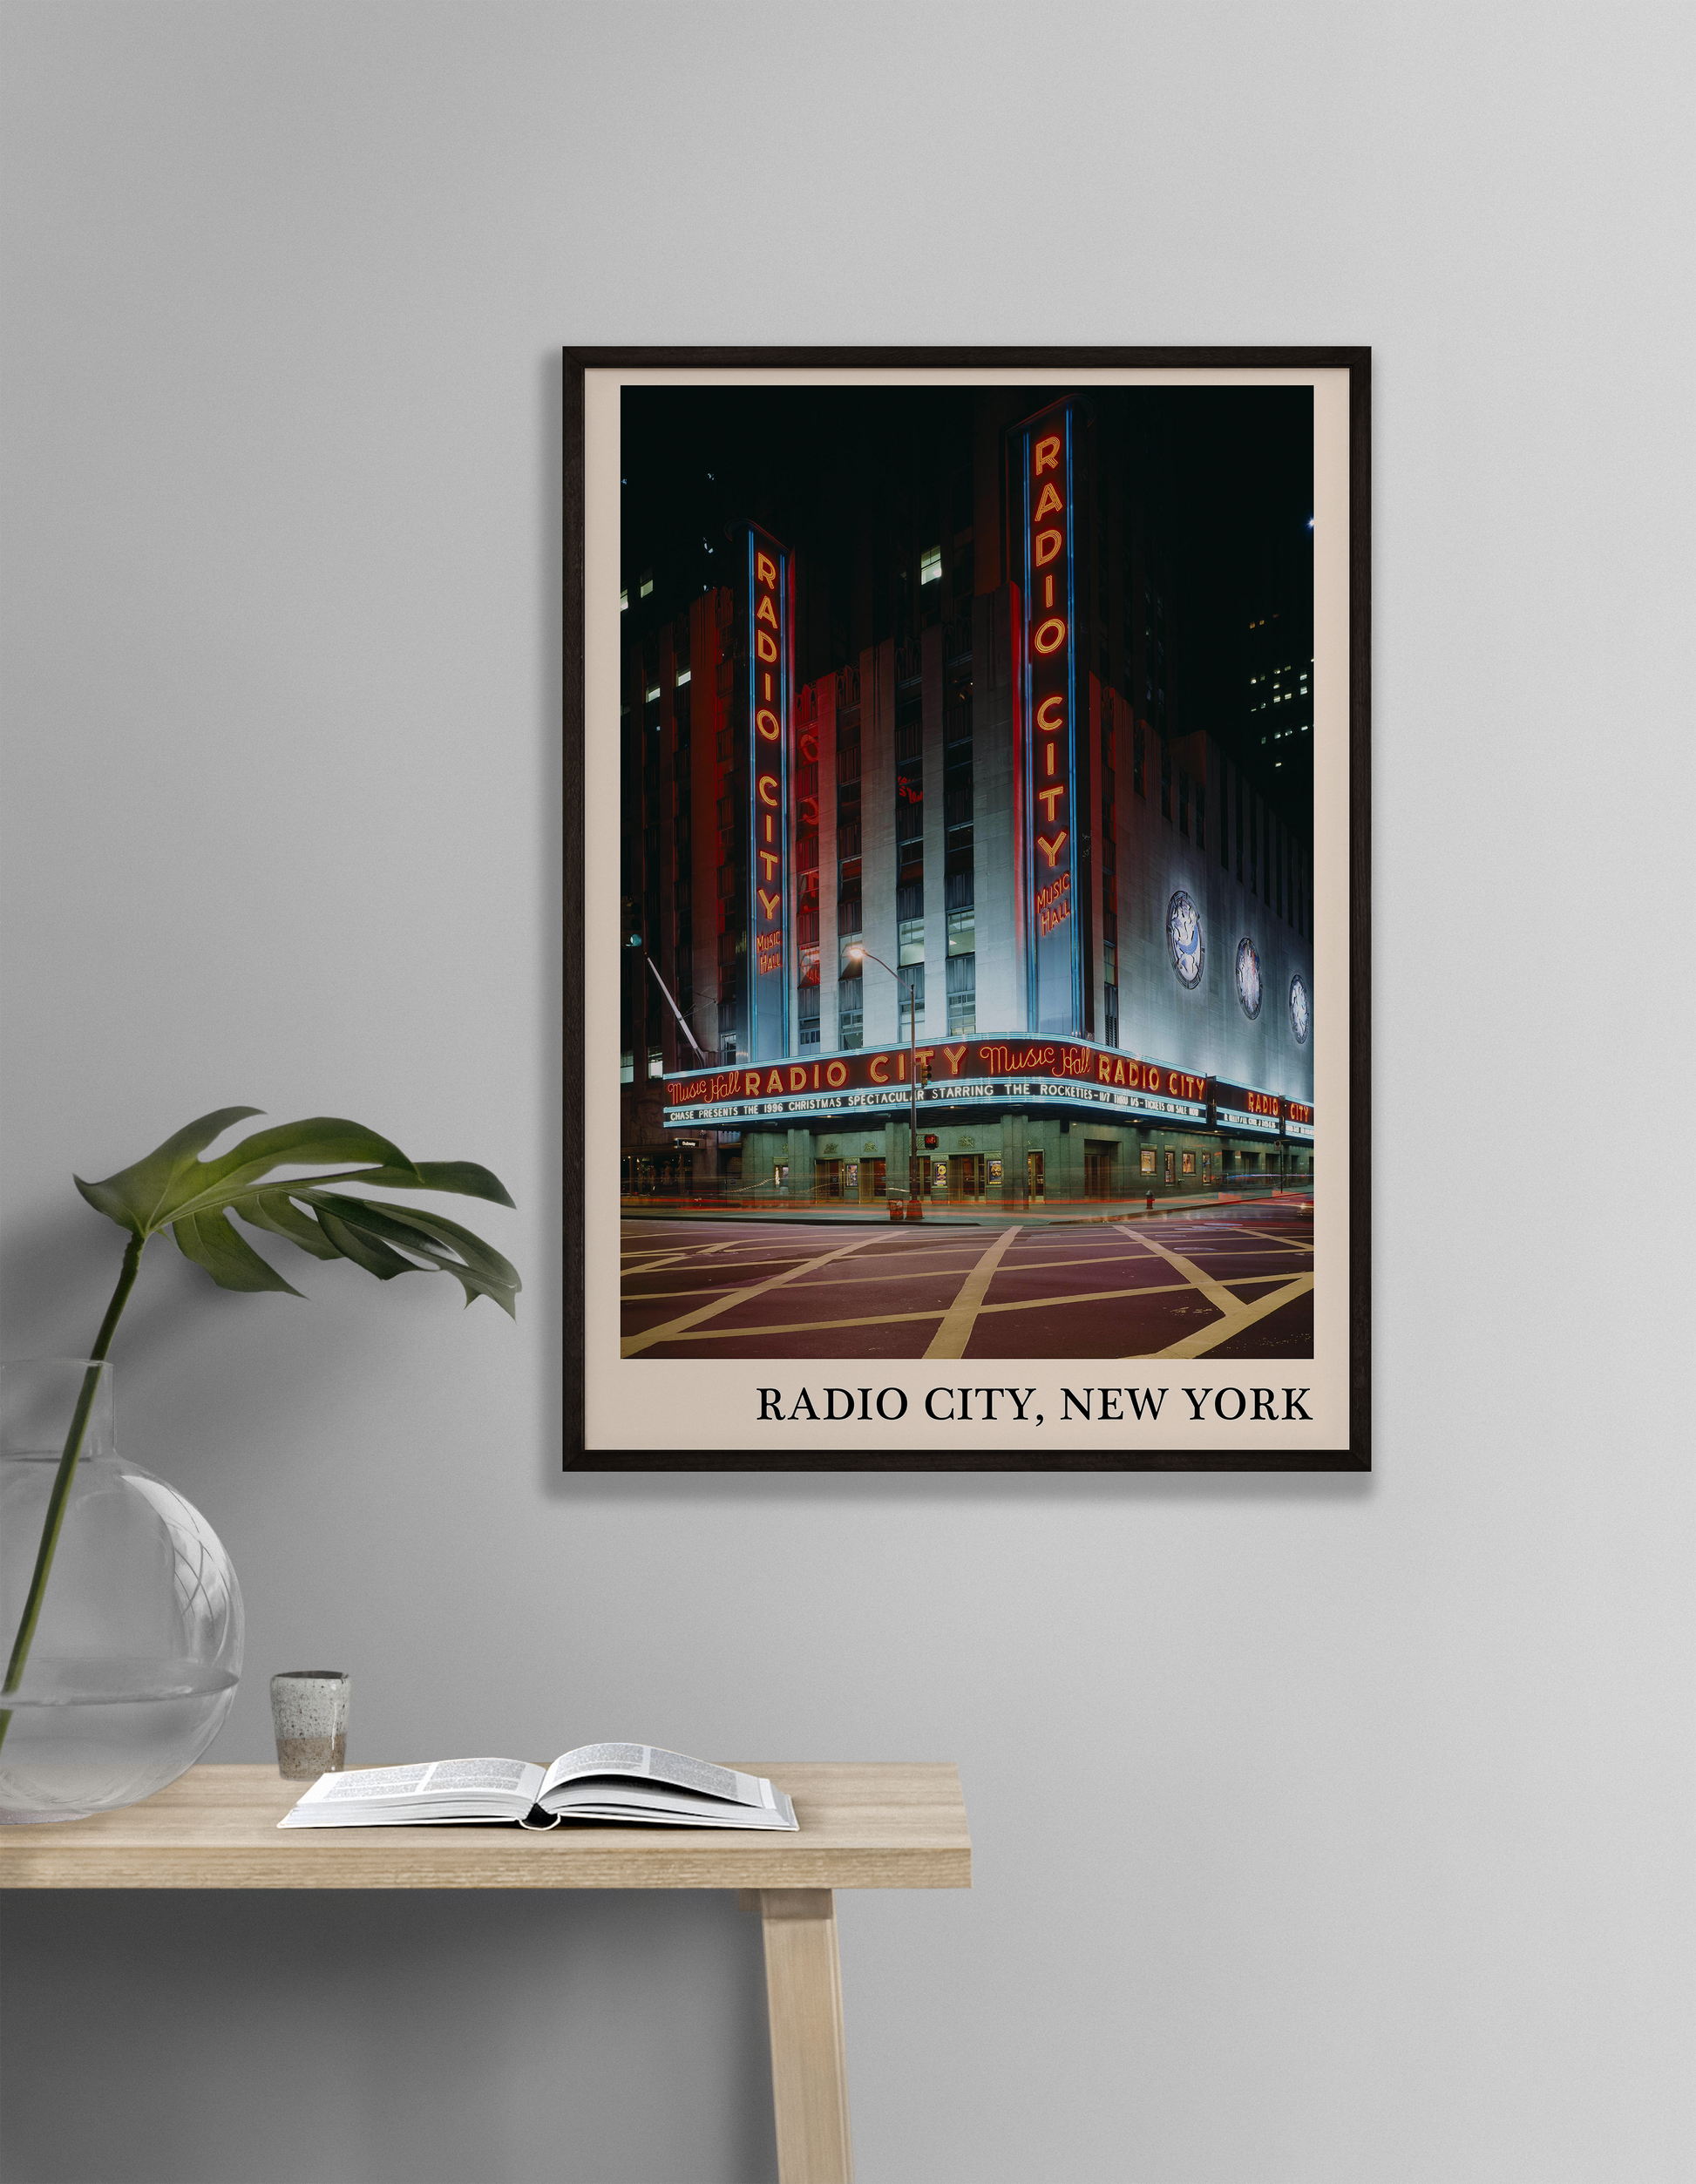 Iconic photo of Radio City in New York captured in a retro black framed jazz venue print, hanging on a grey living room wall